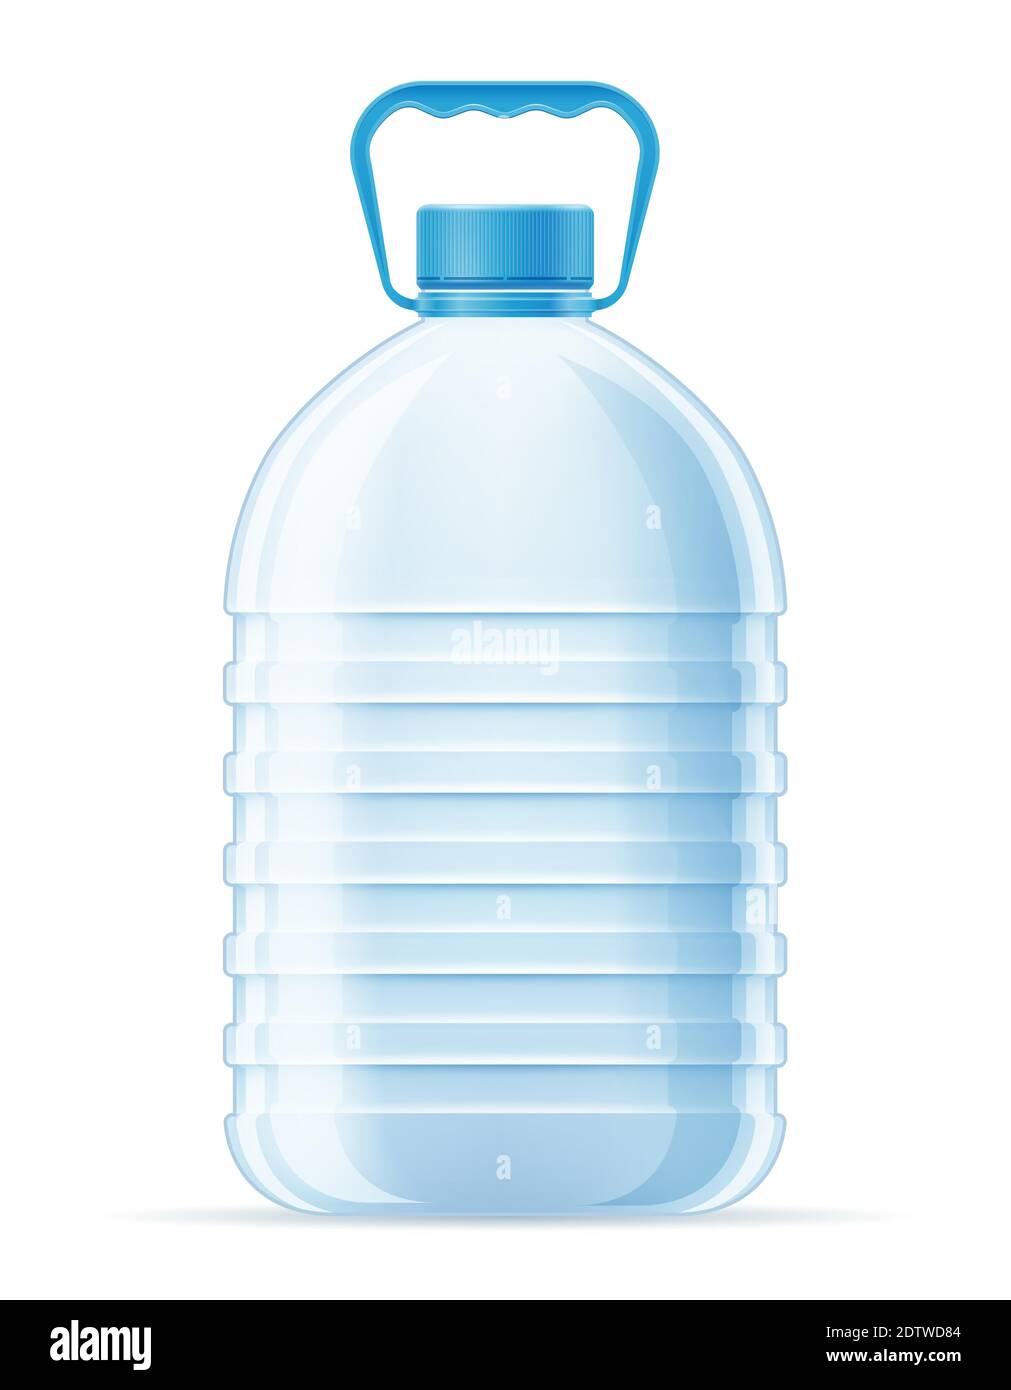 https://c8.alamy.com/comp/2DTWD84/plastic-bottle-for-drinking-water-transparent-vector-illustration-isolated-on-white-background-2DTWD84.jpg